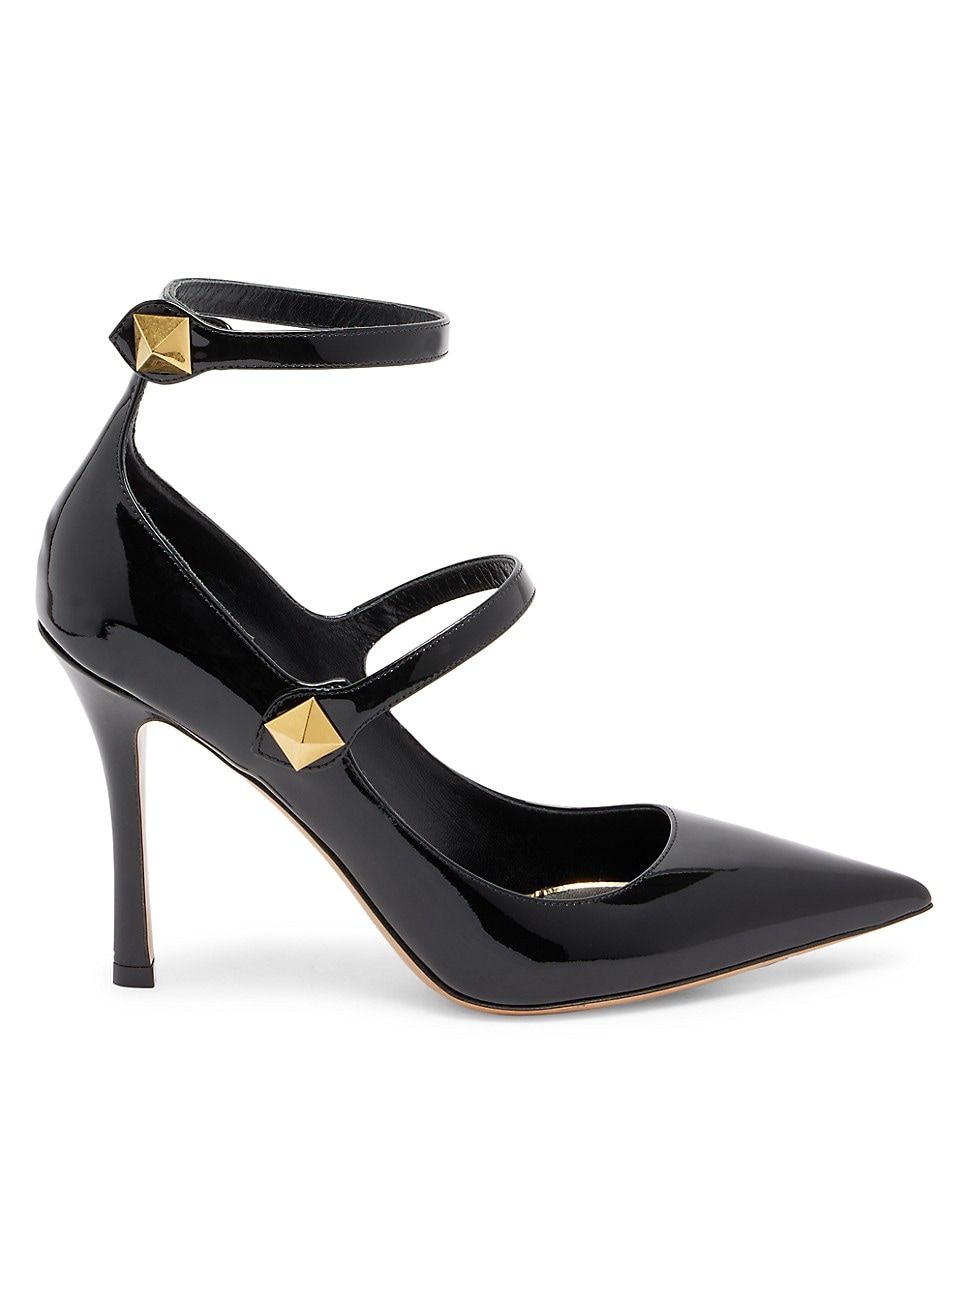 Patent Leather Strappy Pumps | Saks Fifth Avenue